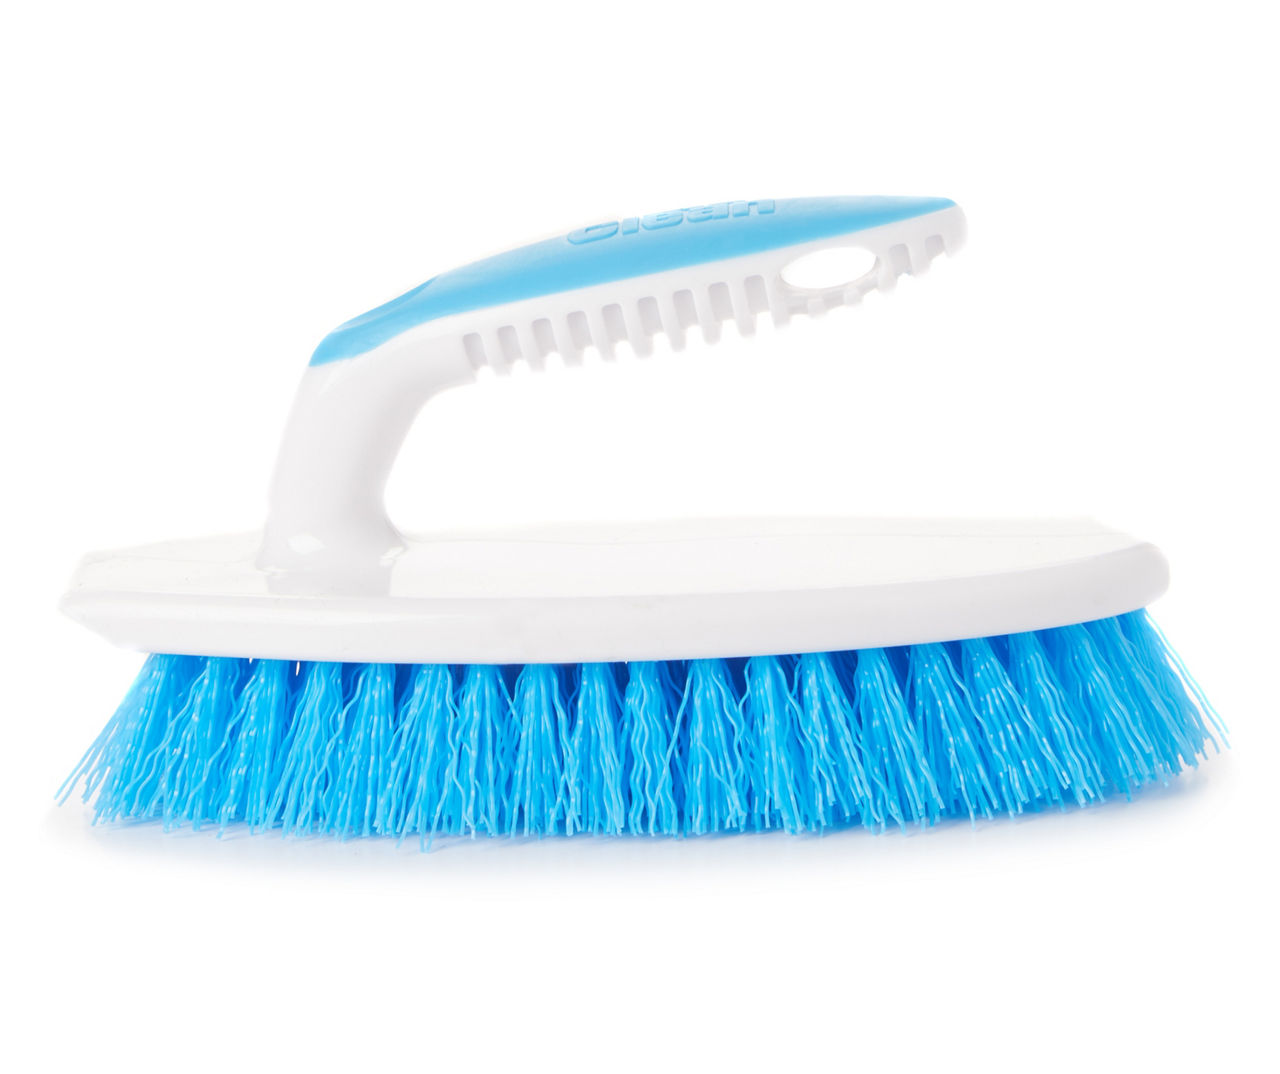 Mr. Clean Counter Brush, Blue